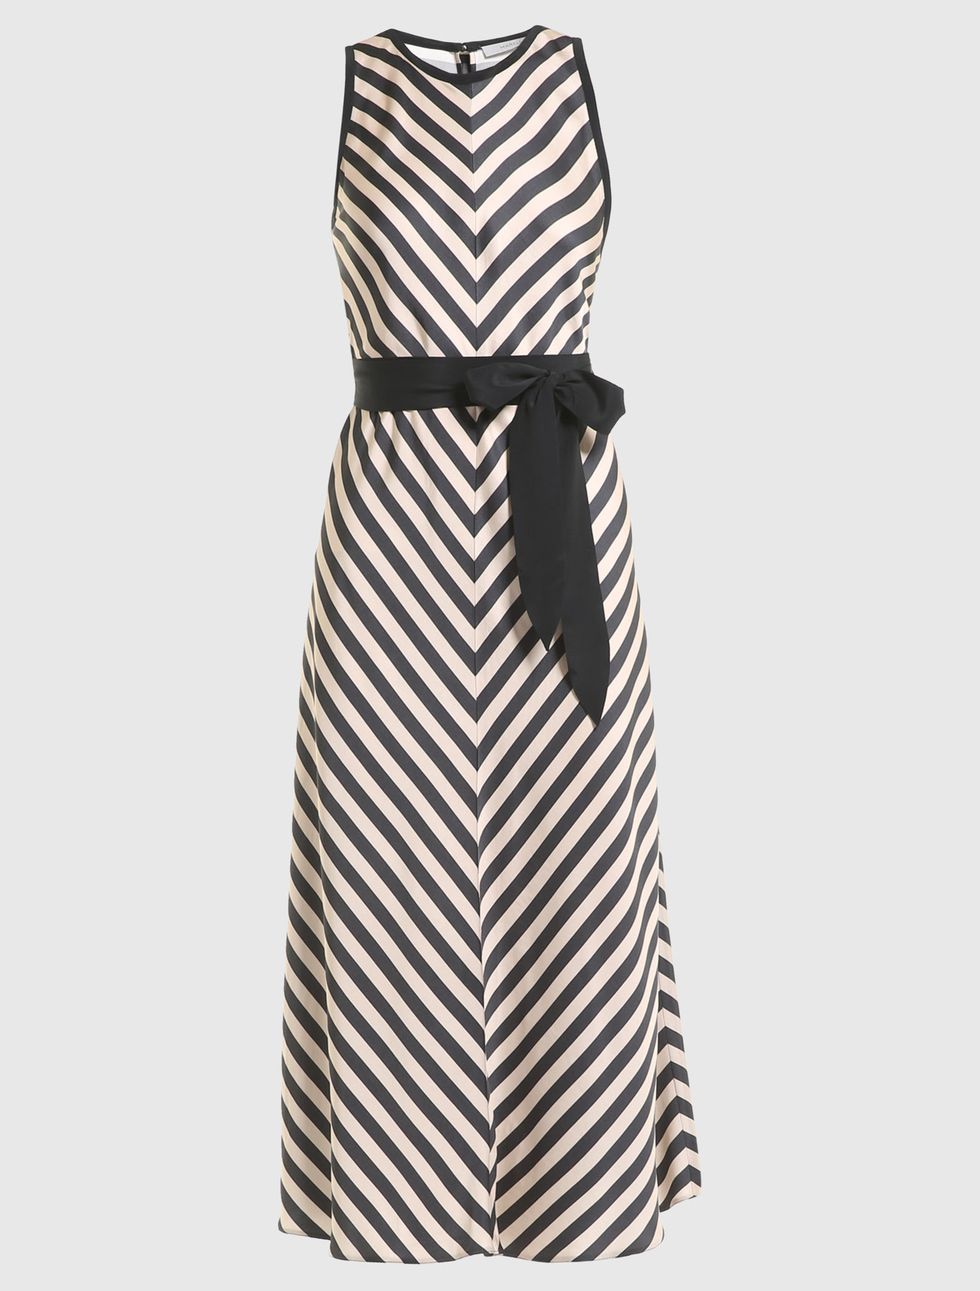 Clothing, Day dress, Dress, White, Cocktail dress, Black-and-white, Beige, Pattern, Cover-up, 